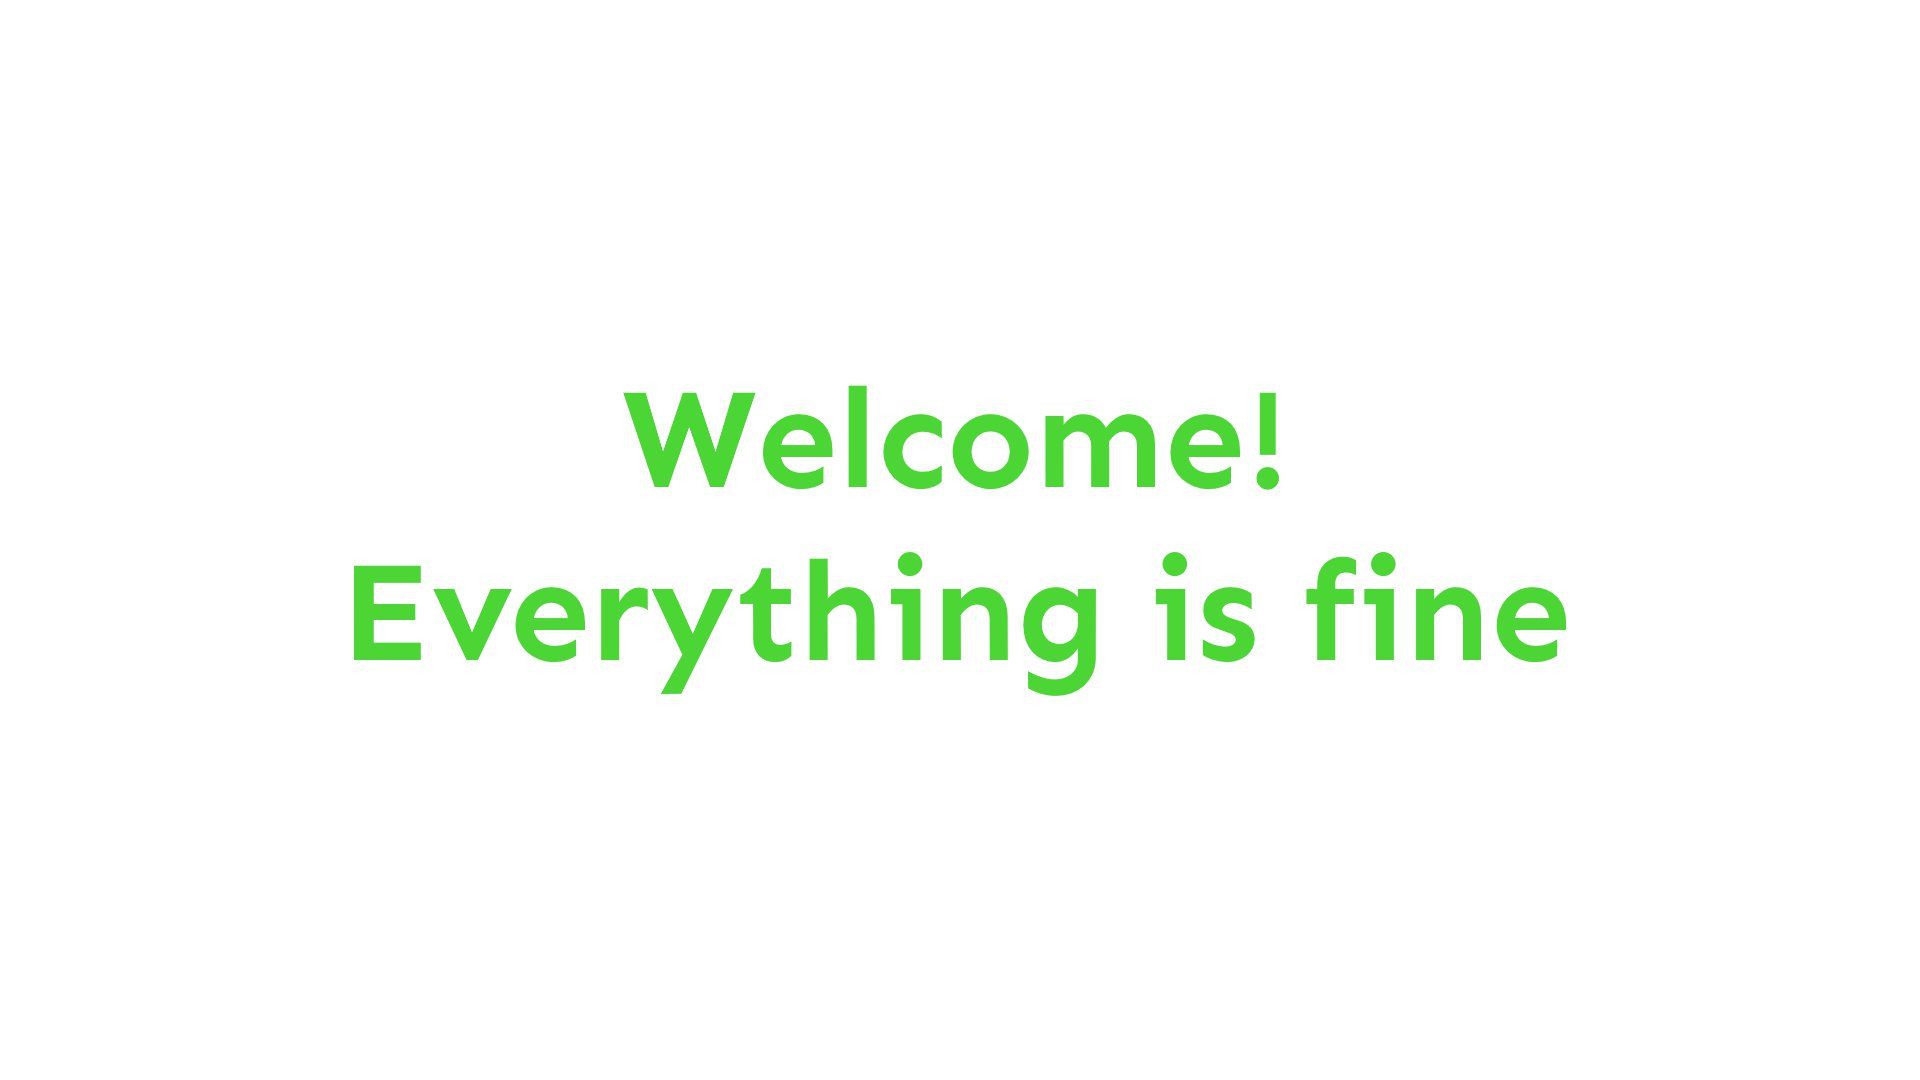 Welcome! Everything is fine. Wallpaper!